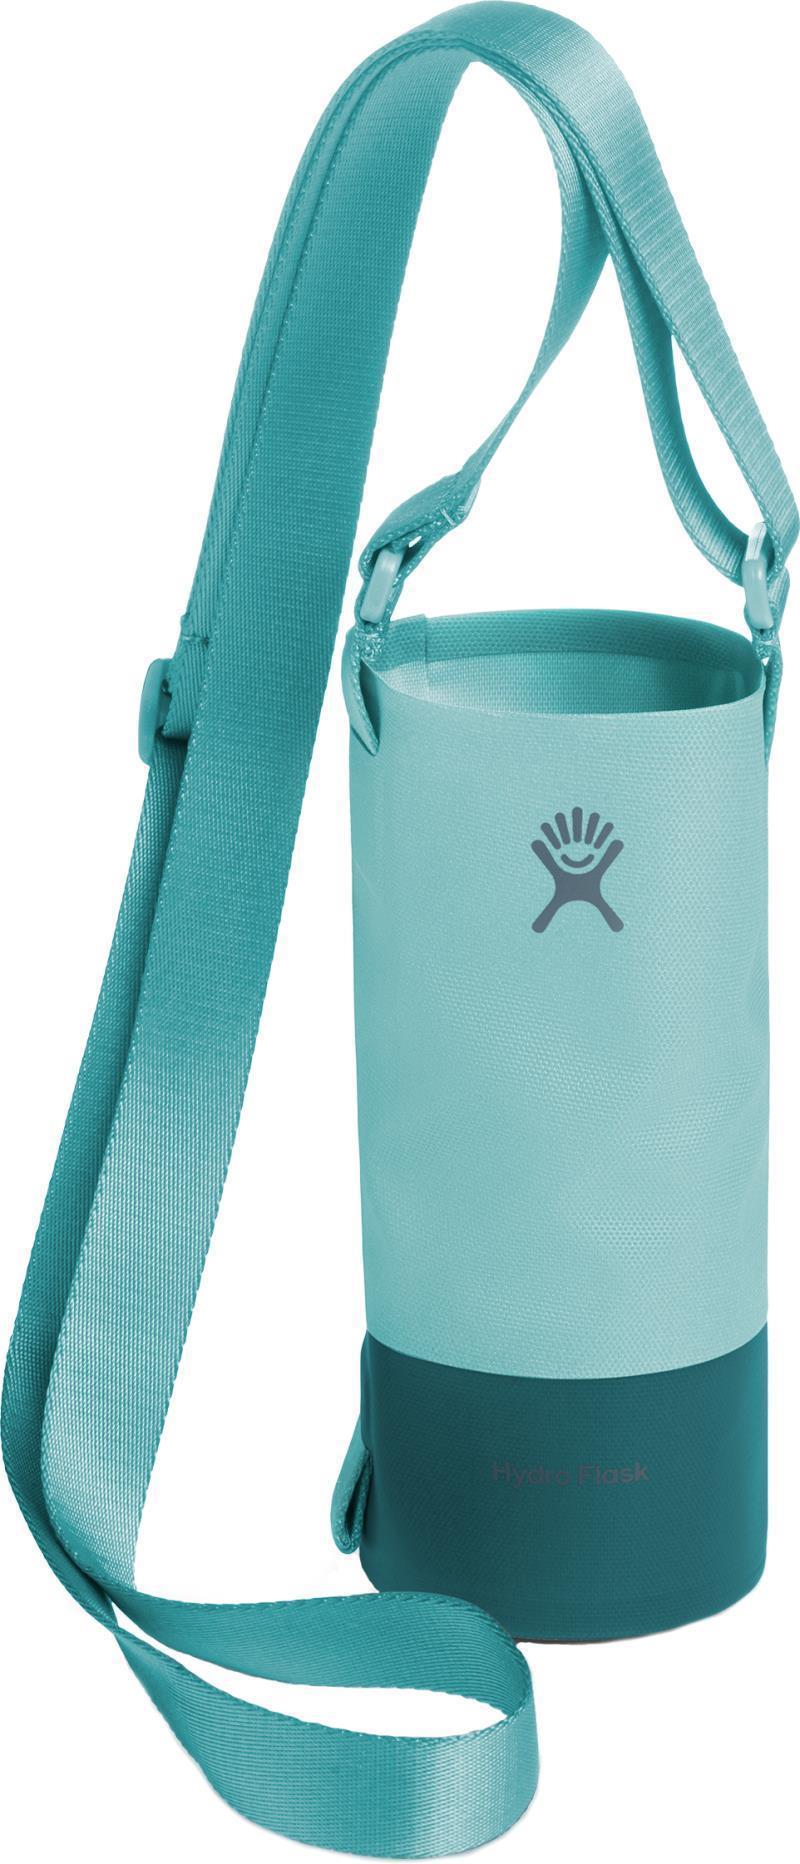 Tag Along Bottle Sling - Small